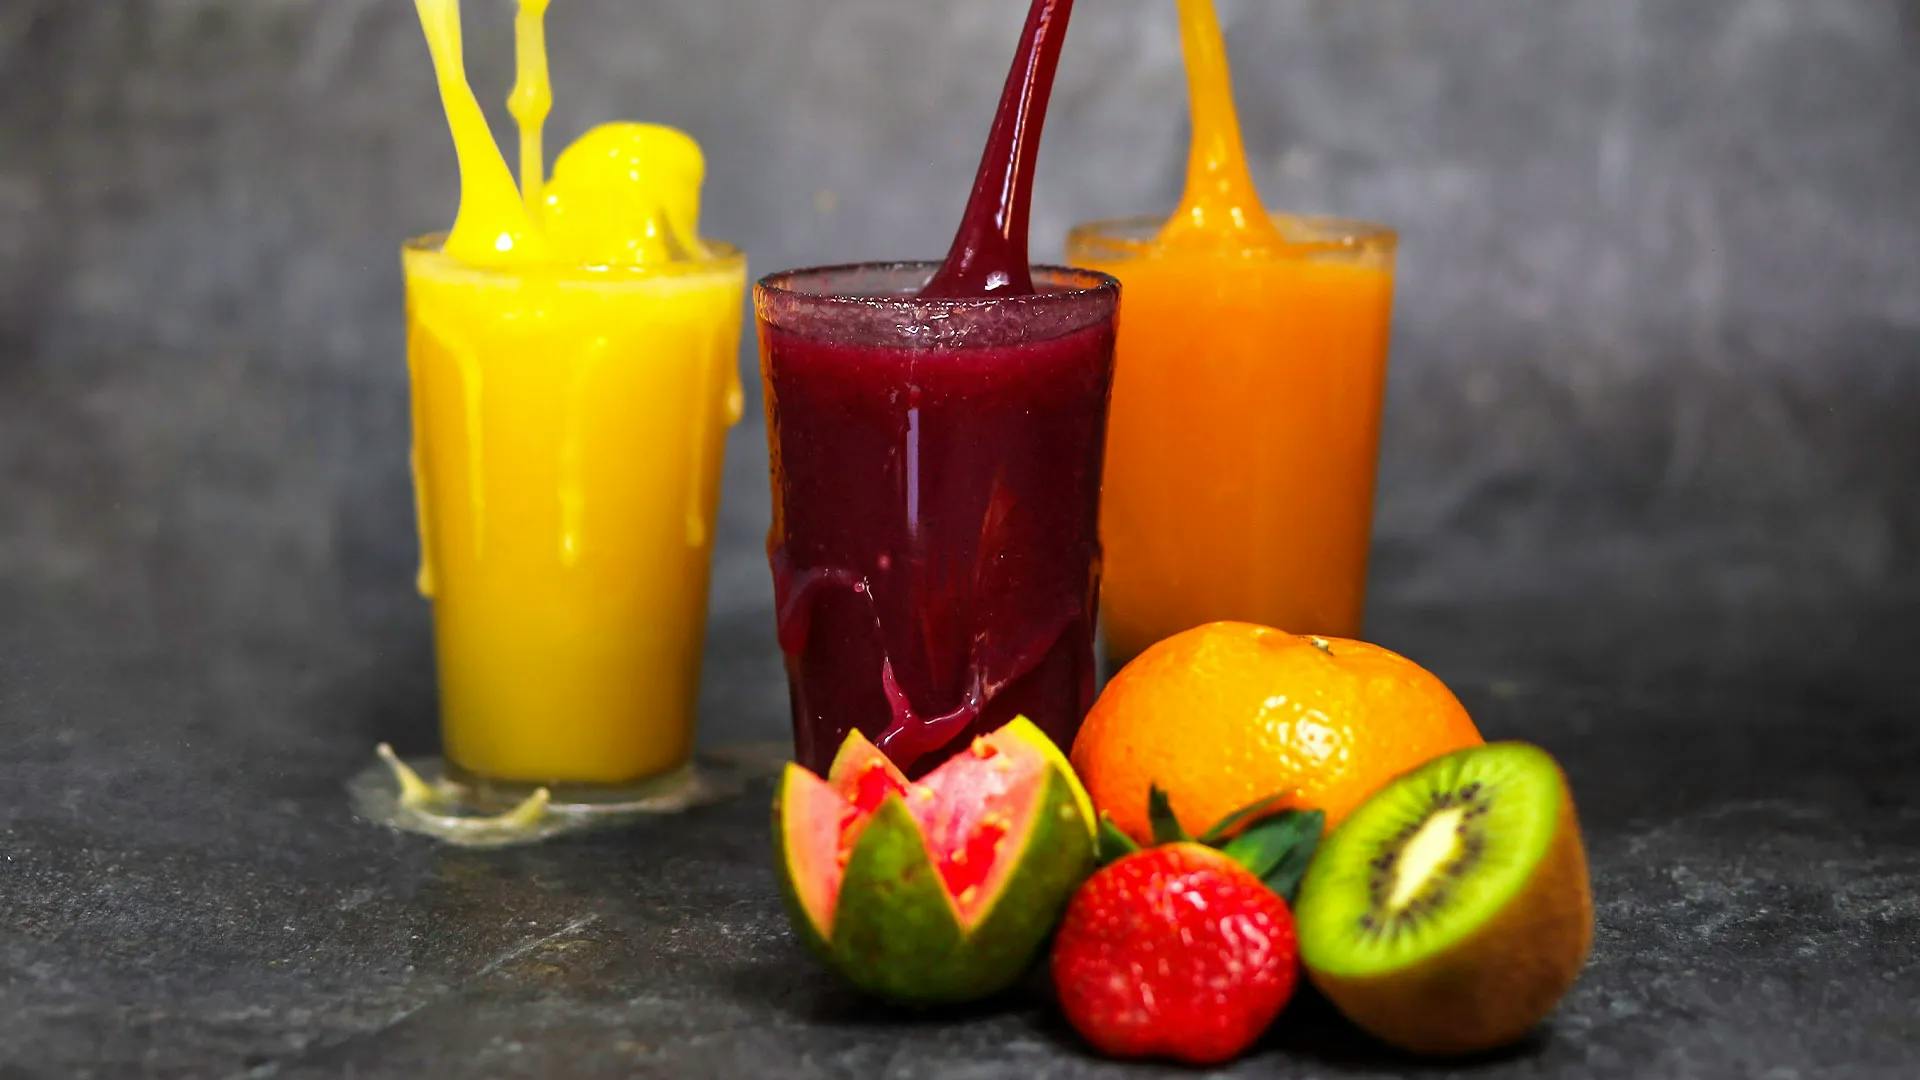 You can get a lot of nutrients from juice, and it is an easy